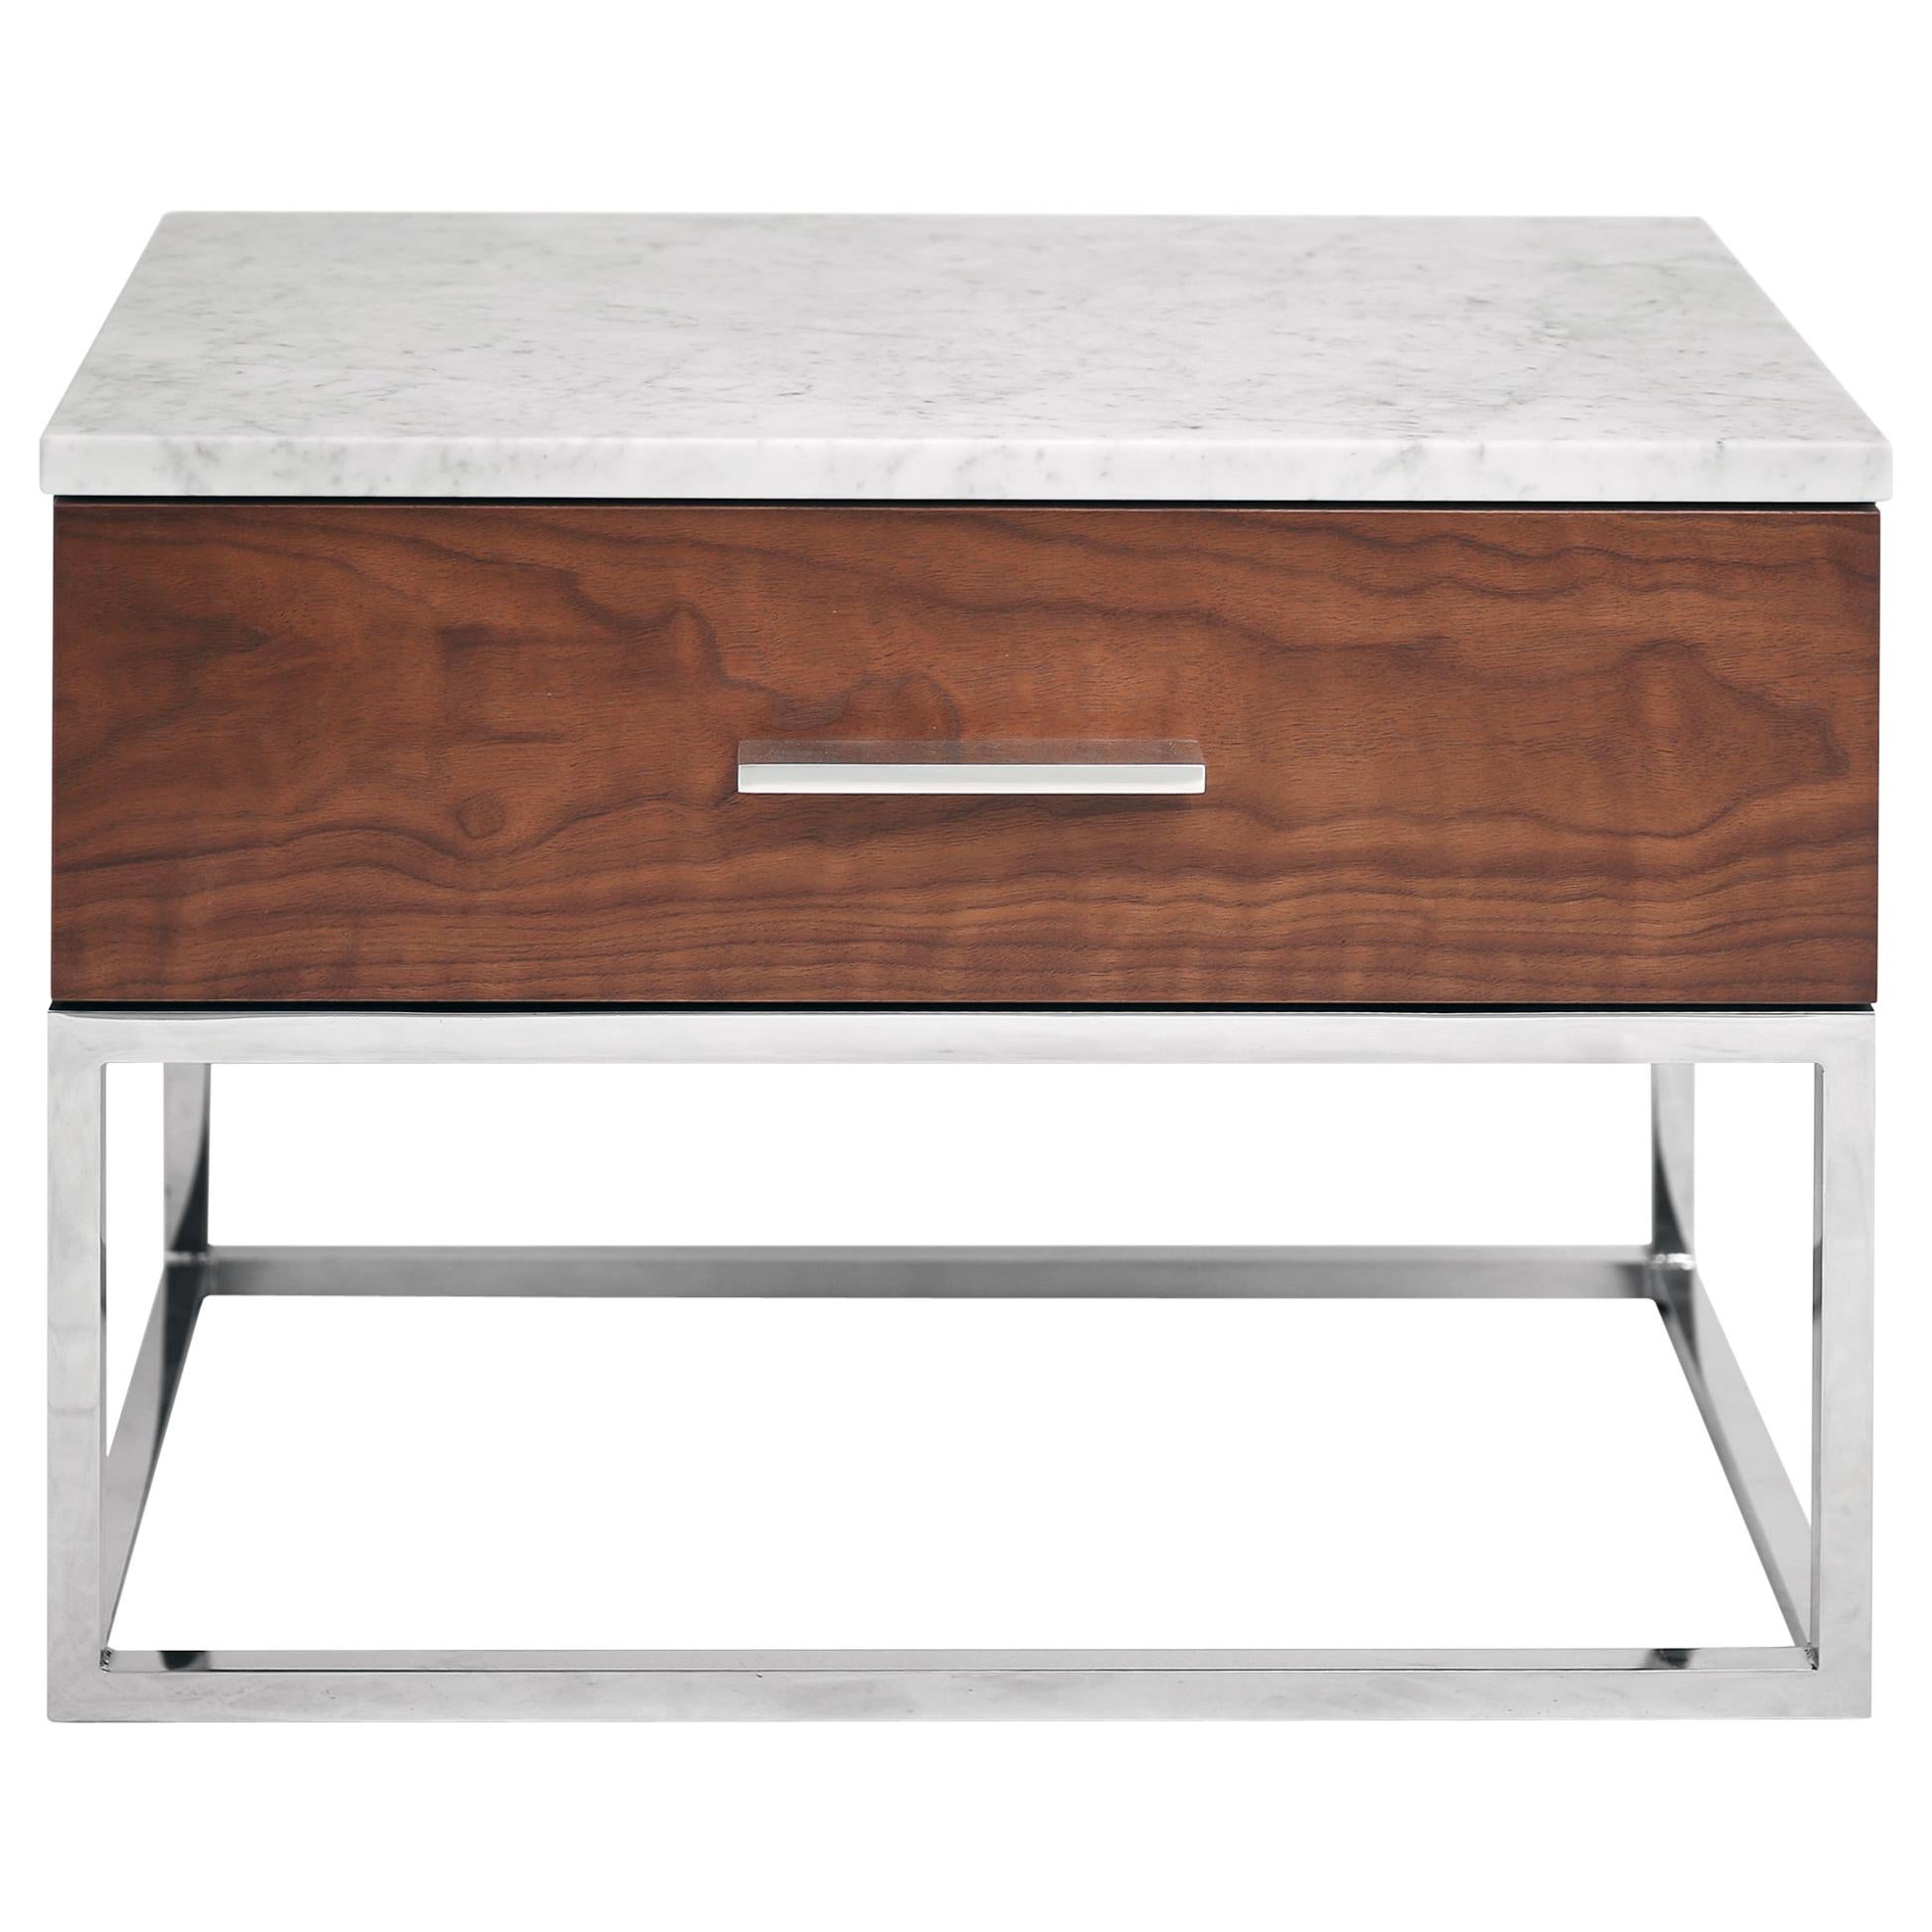 Mid-Century Modern Akureyri Bedside Table in Walnut, Stainless Steel and Marble For Sale